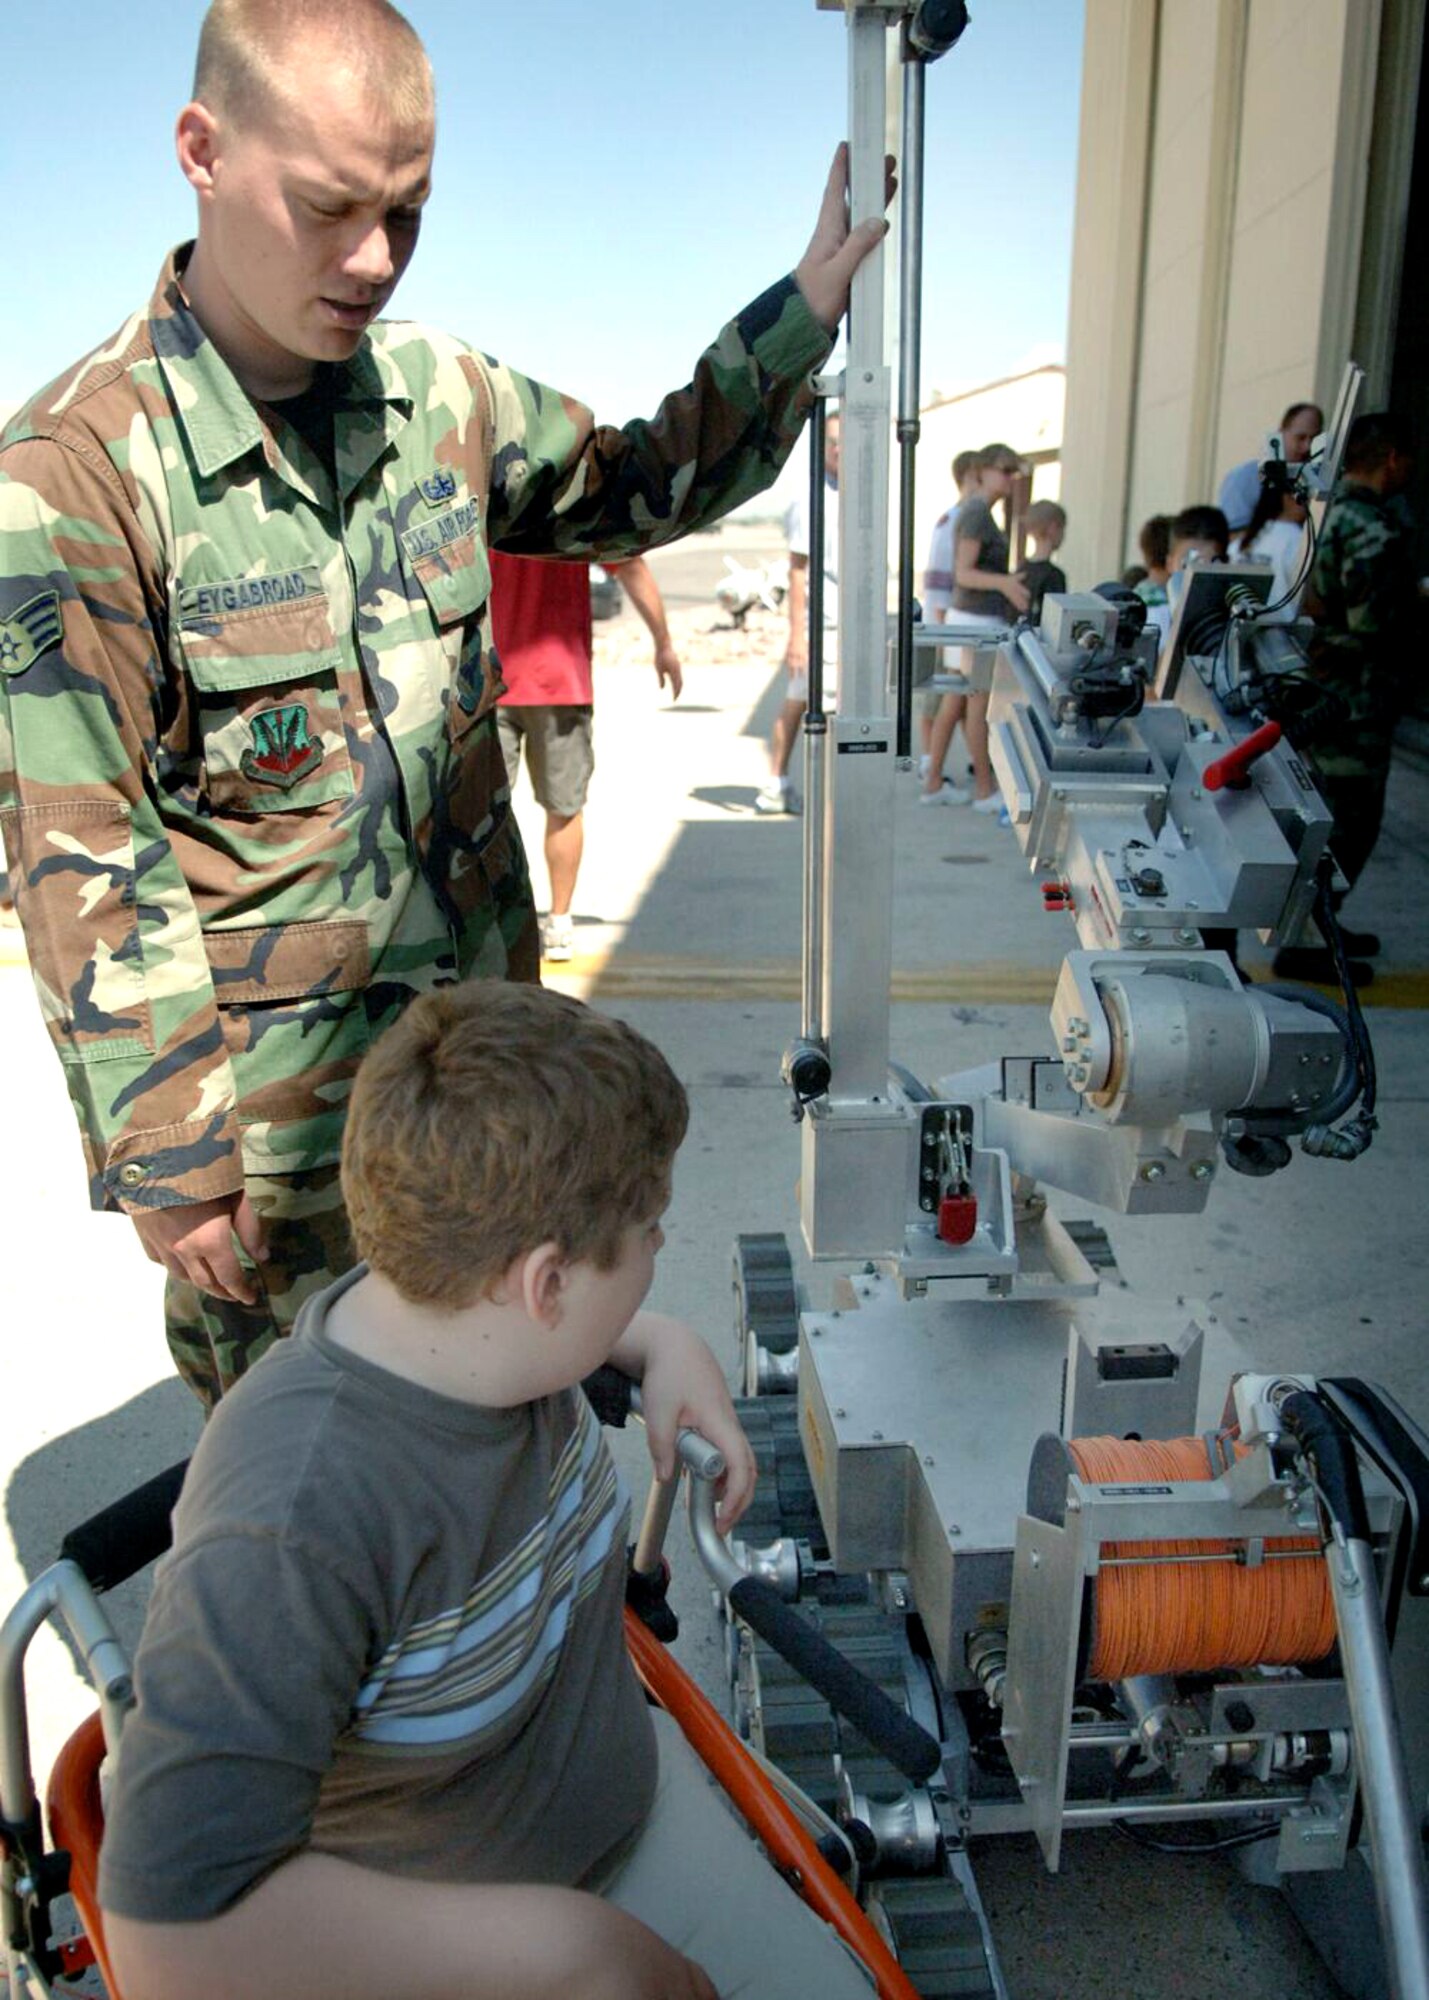 Senior Airman Travis Eygabroad shows Lawton Lucas the explosive ordnance disposal robot during a tour of Davis-Monthan Air Force Base, Ariz., on July 17. The Make-A-Wish Foundation teamed with Davis-Monthan to offer a tour of the base for Lawton and other Make-A-Wish children as well as their families. The tour consisted of demonstrations by an EOD robot, base fire department and a weapons loading crew for an A-10 Thunderbolt II. Airman Eygabroad is an EOD technician from the 355th Civil Engineering Squadron. (U.S. Air Force photo/Senior Airman Christina D. Ponte)
